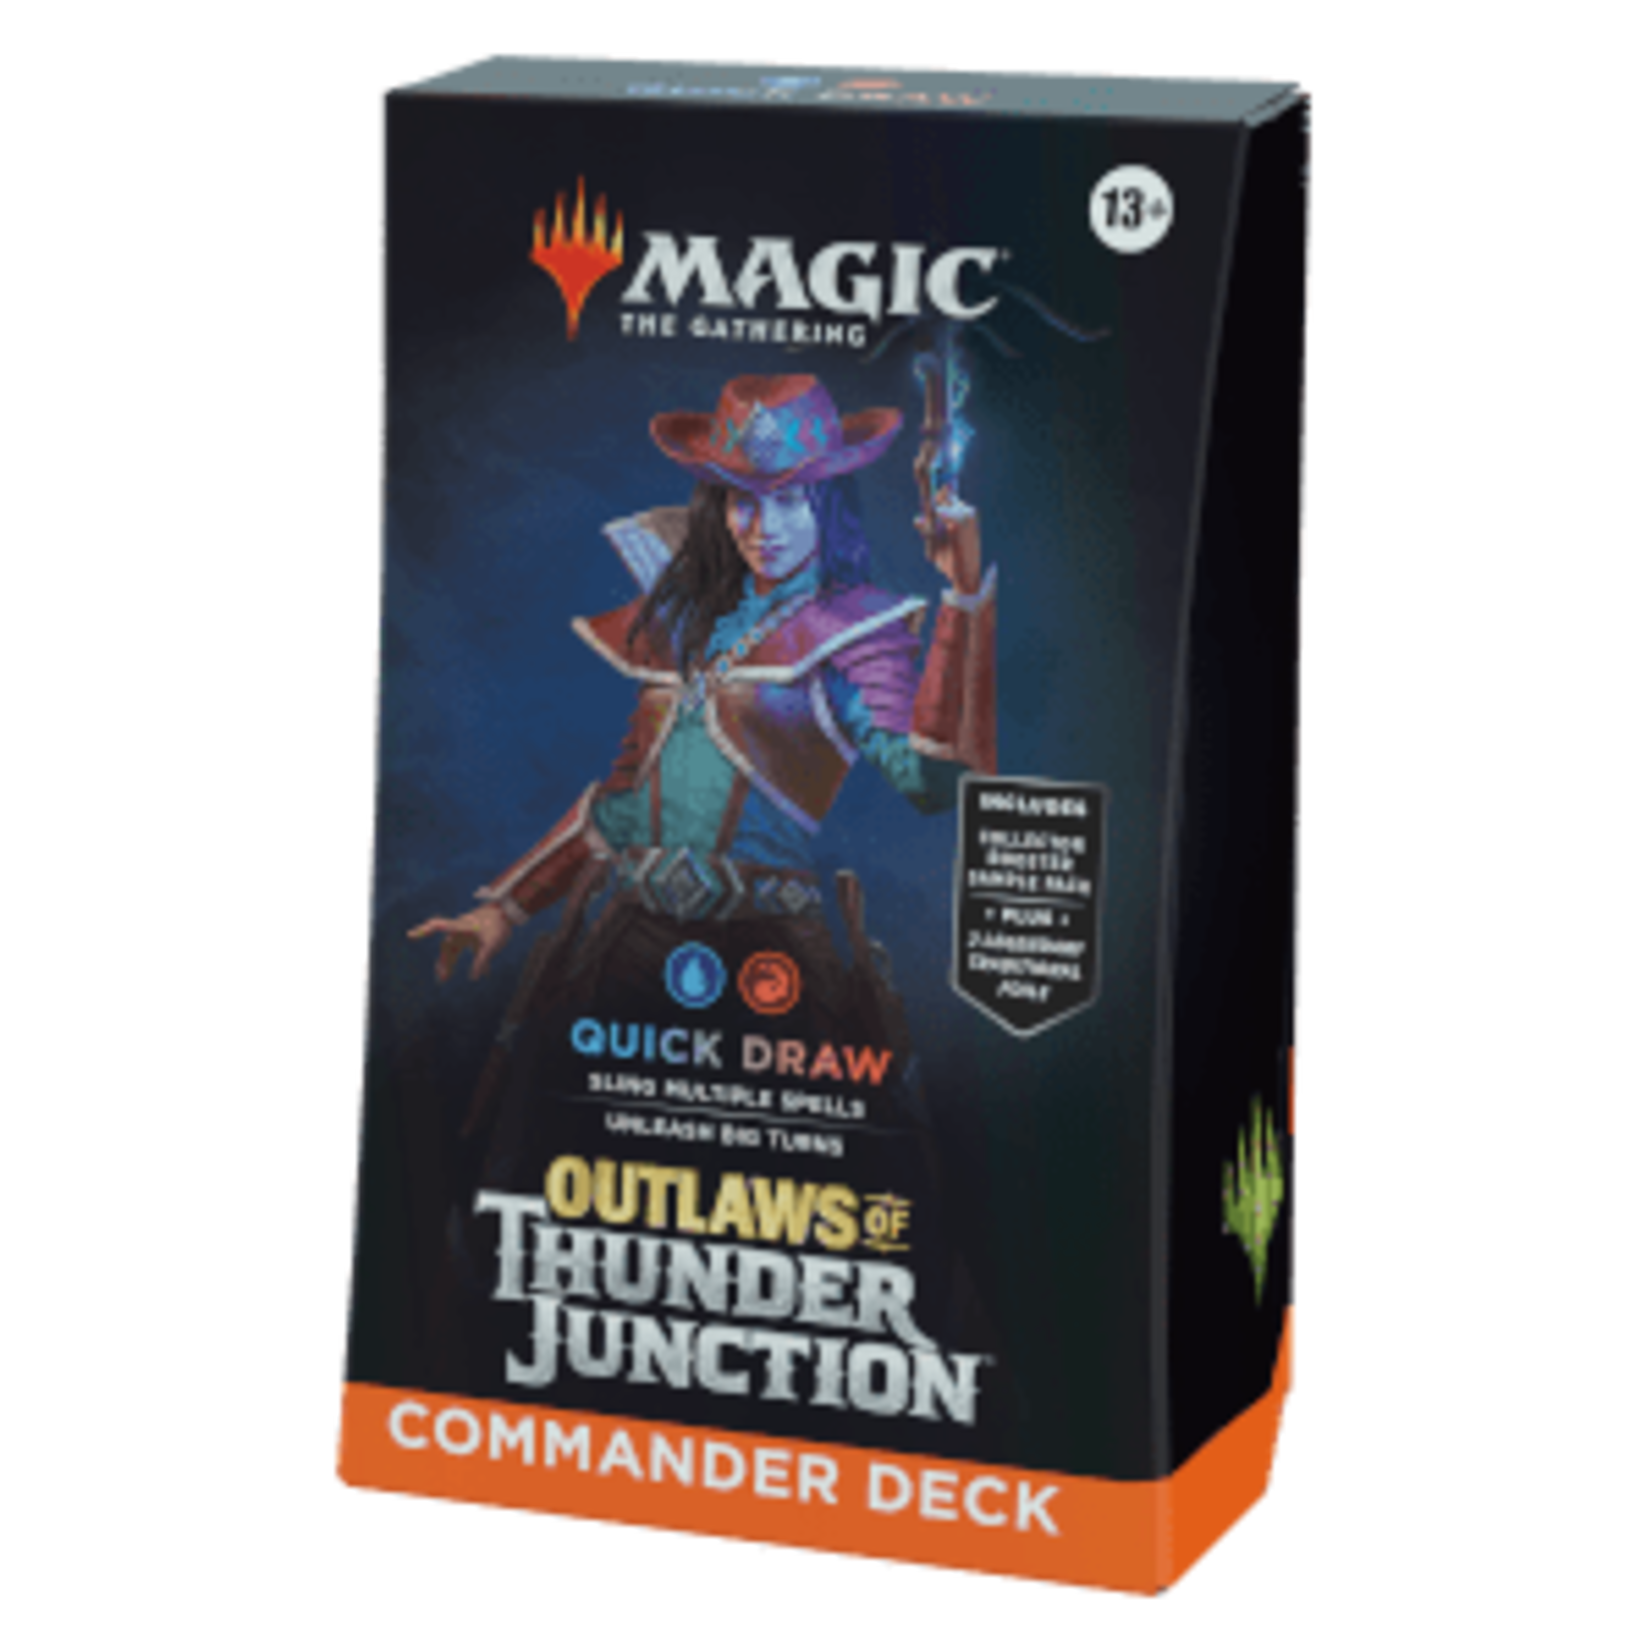 Magic the gathering Outlaws of Thunder Junction: "Quick Draw"